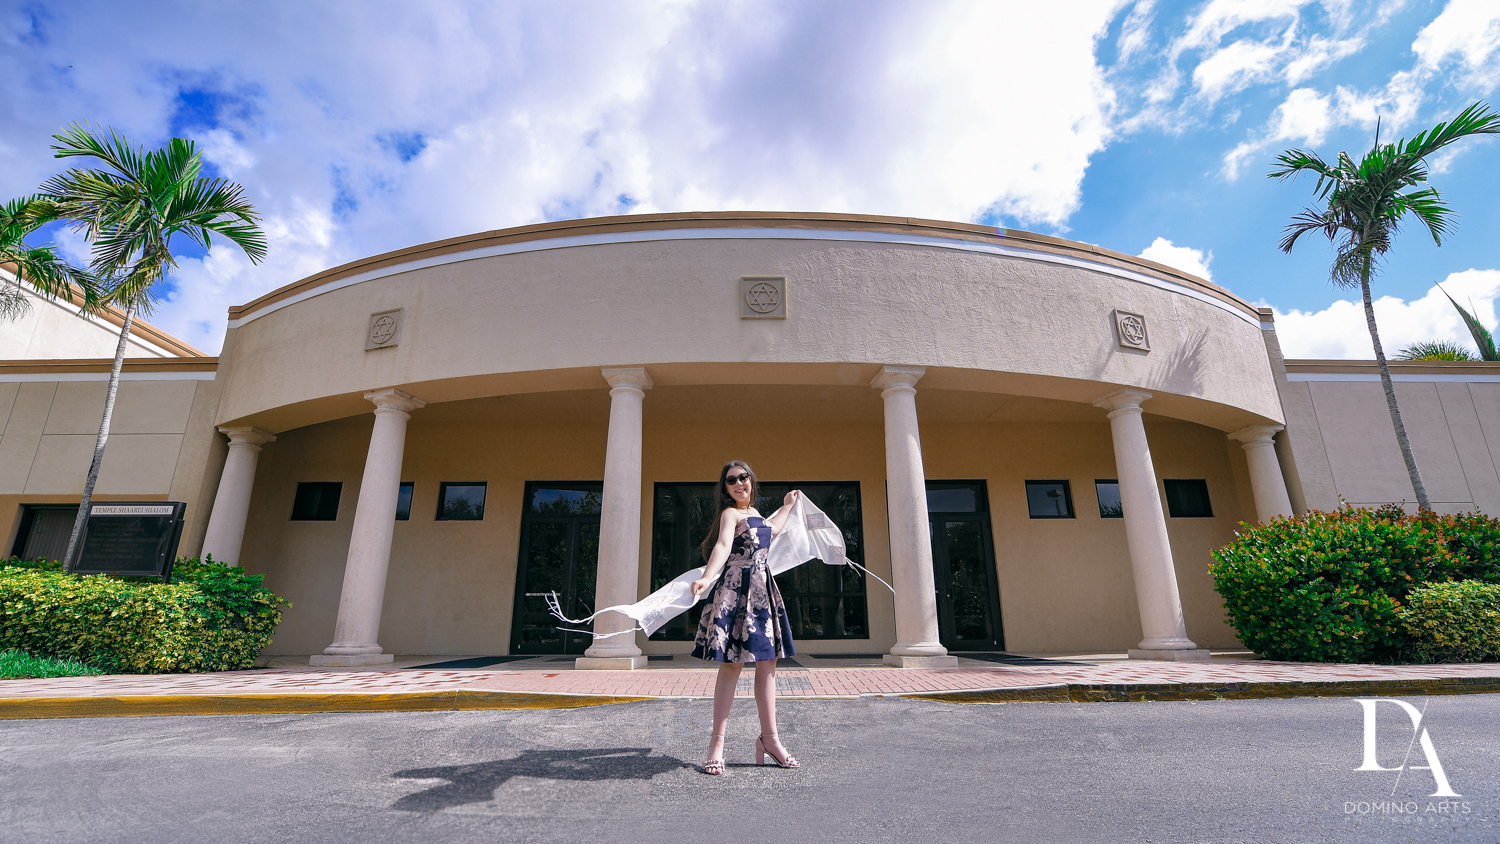 Girl outside of temple at New York Theme Bat Mitzvah at Woodfield Country Club, Boca Raton by Domino Arts Photography